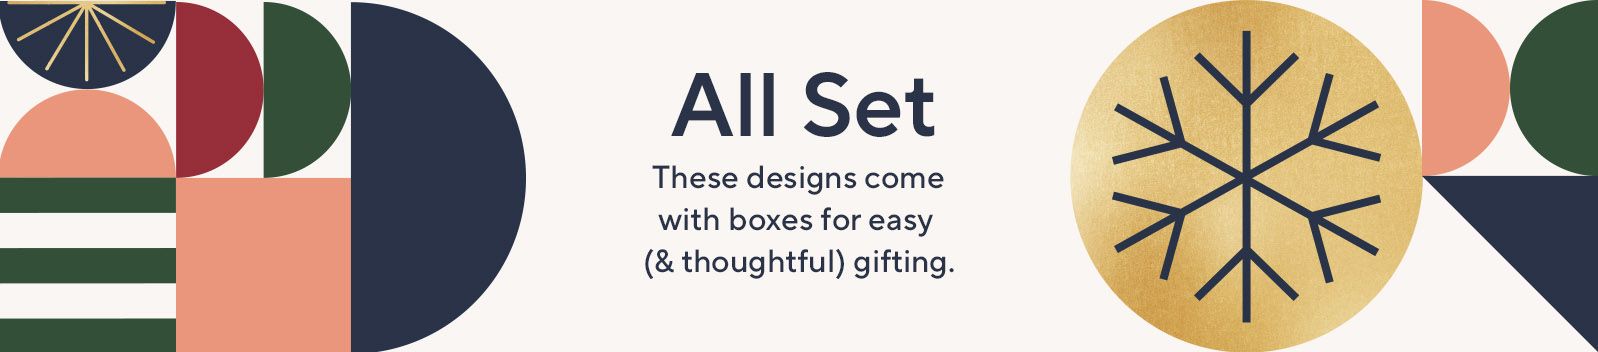 All Set. These designs come with boxes for easy (& thoughtful) gifting.